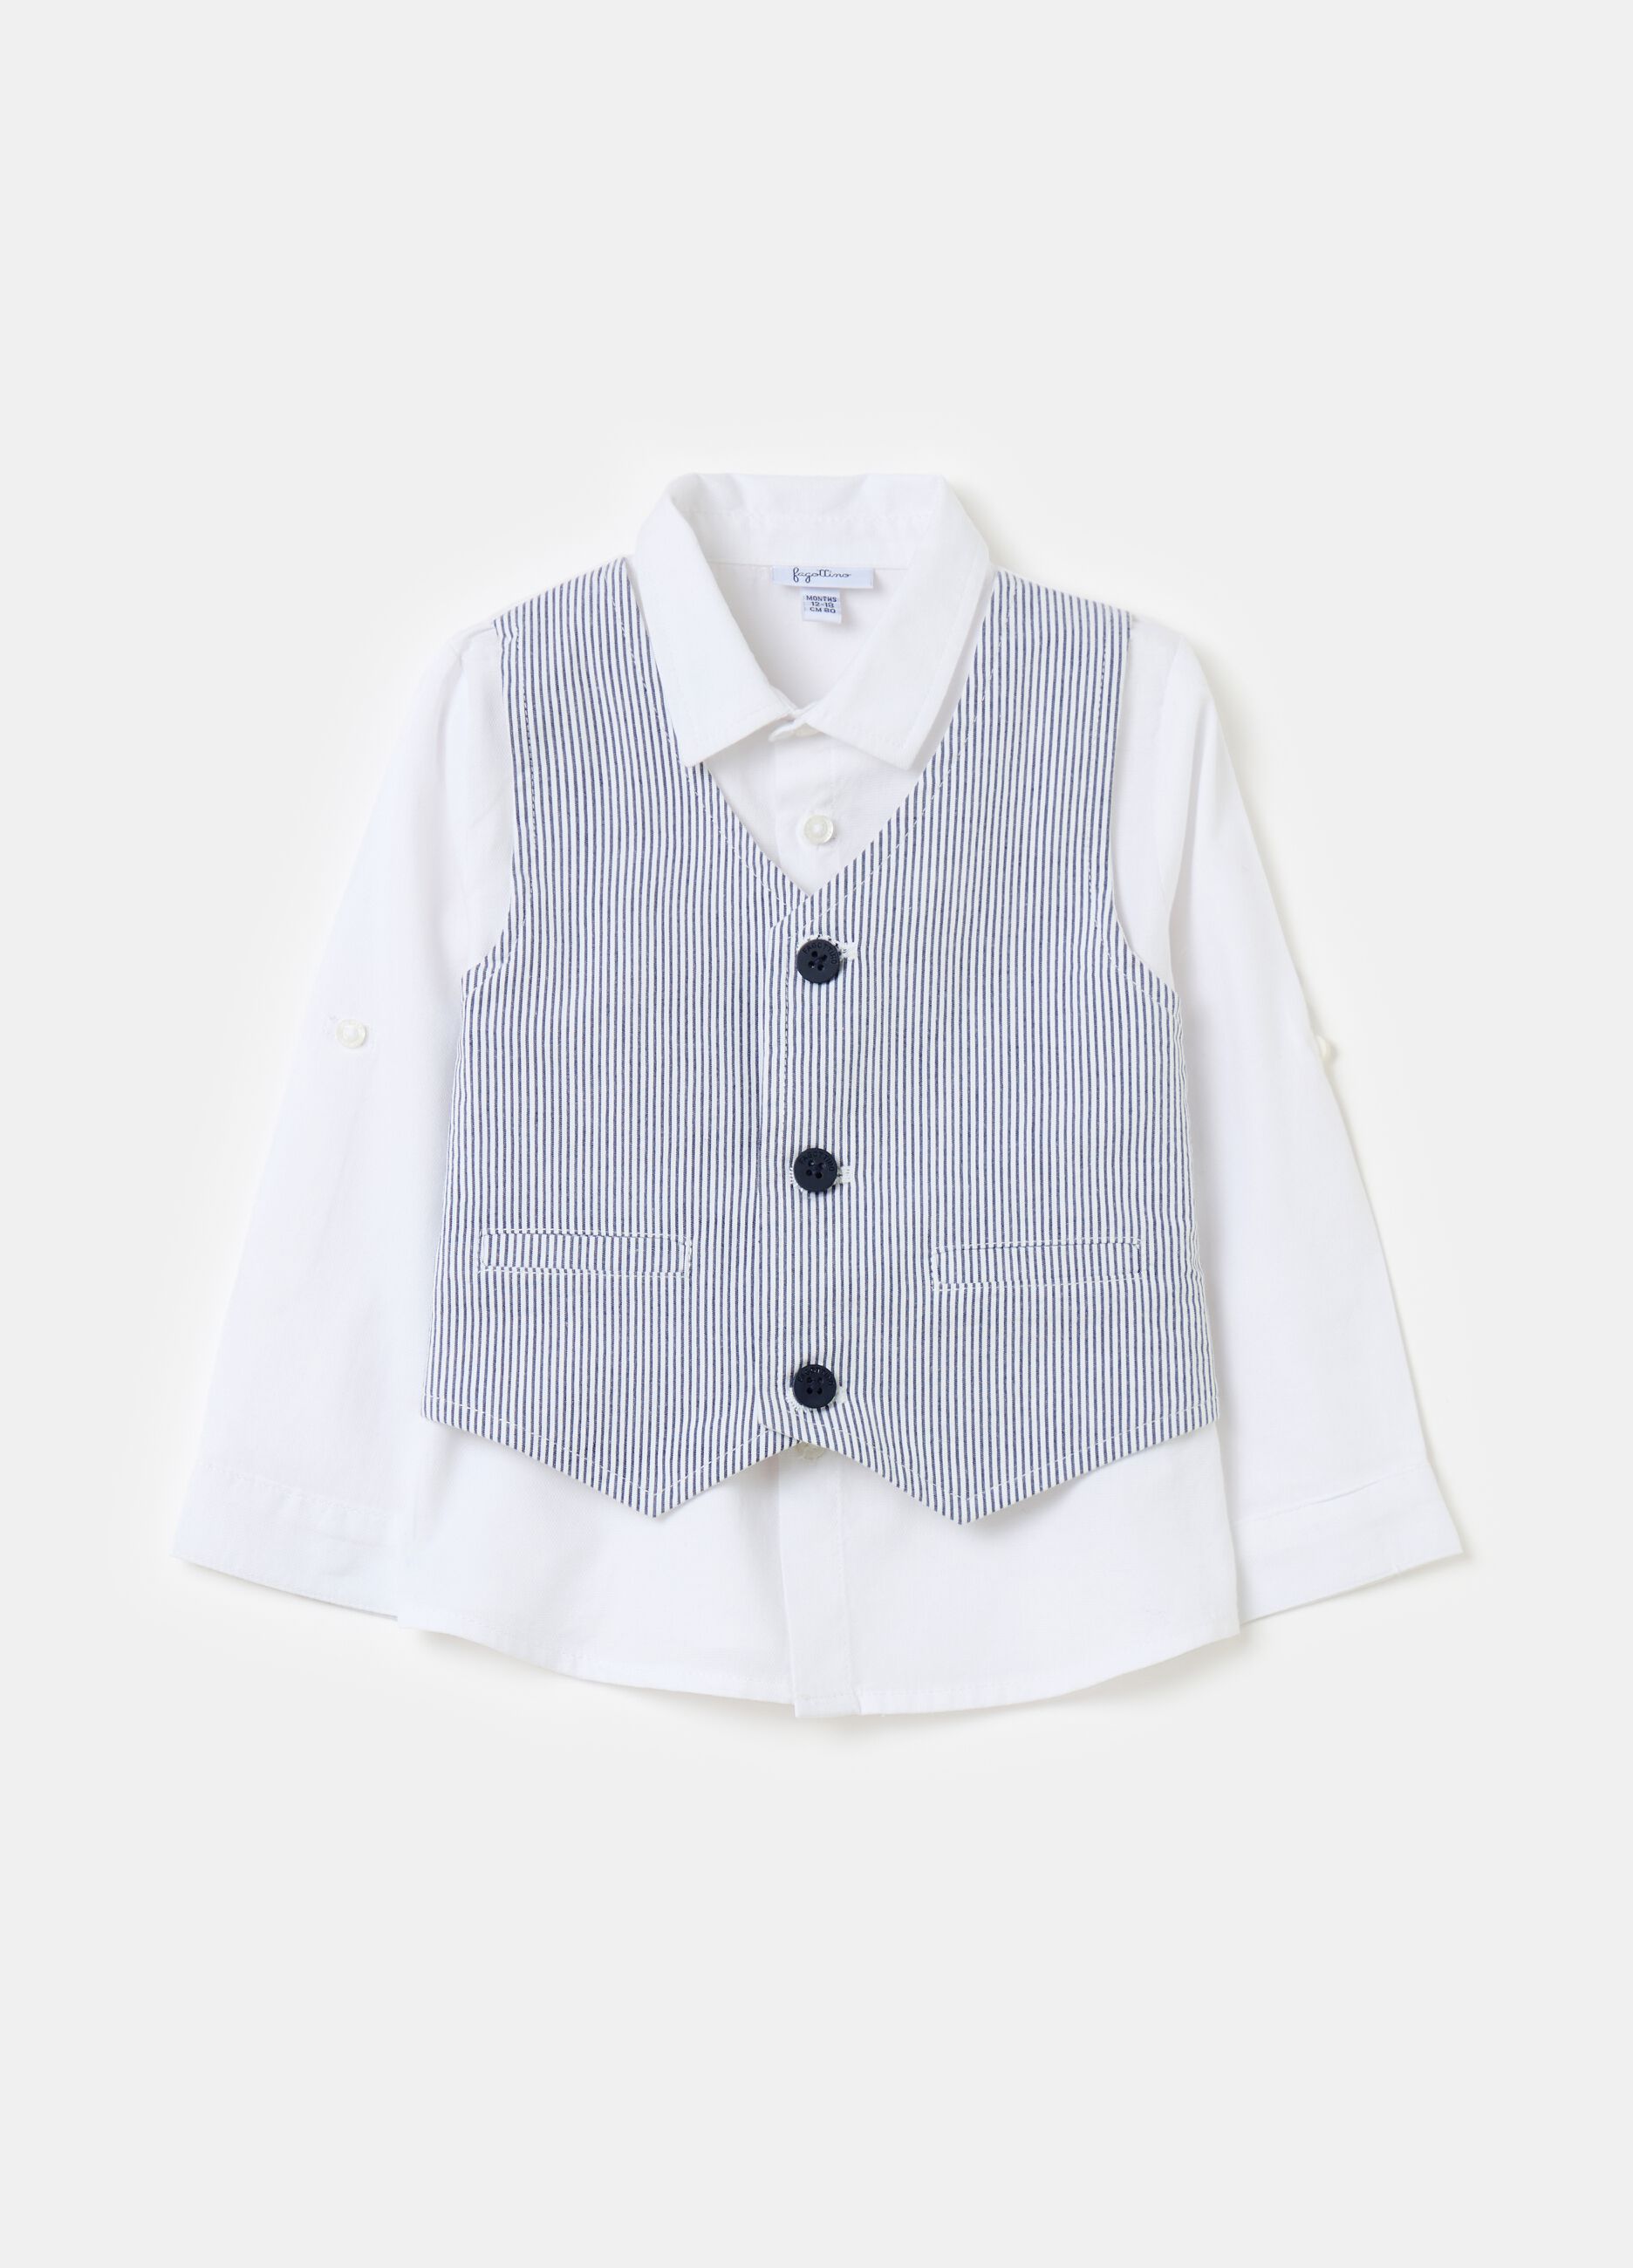 Cotton shirt with striped gilet